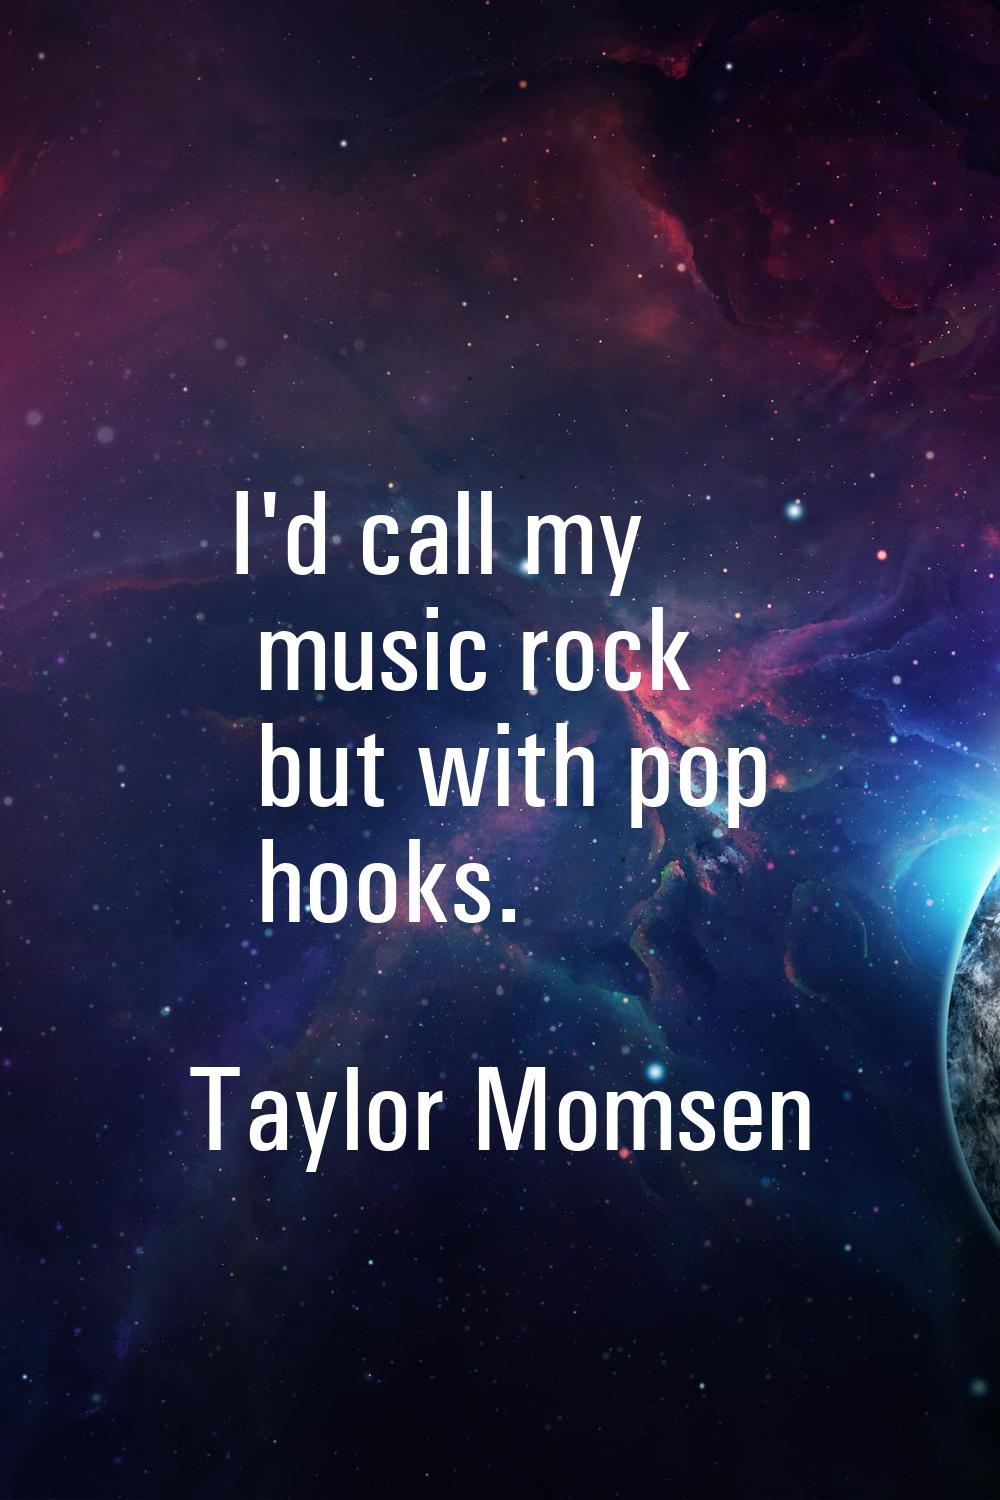 I'd call my music rock but with pop hooks.